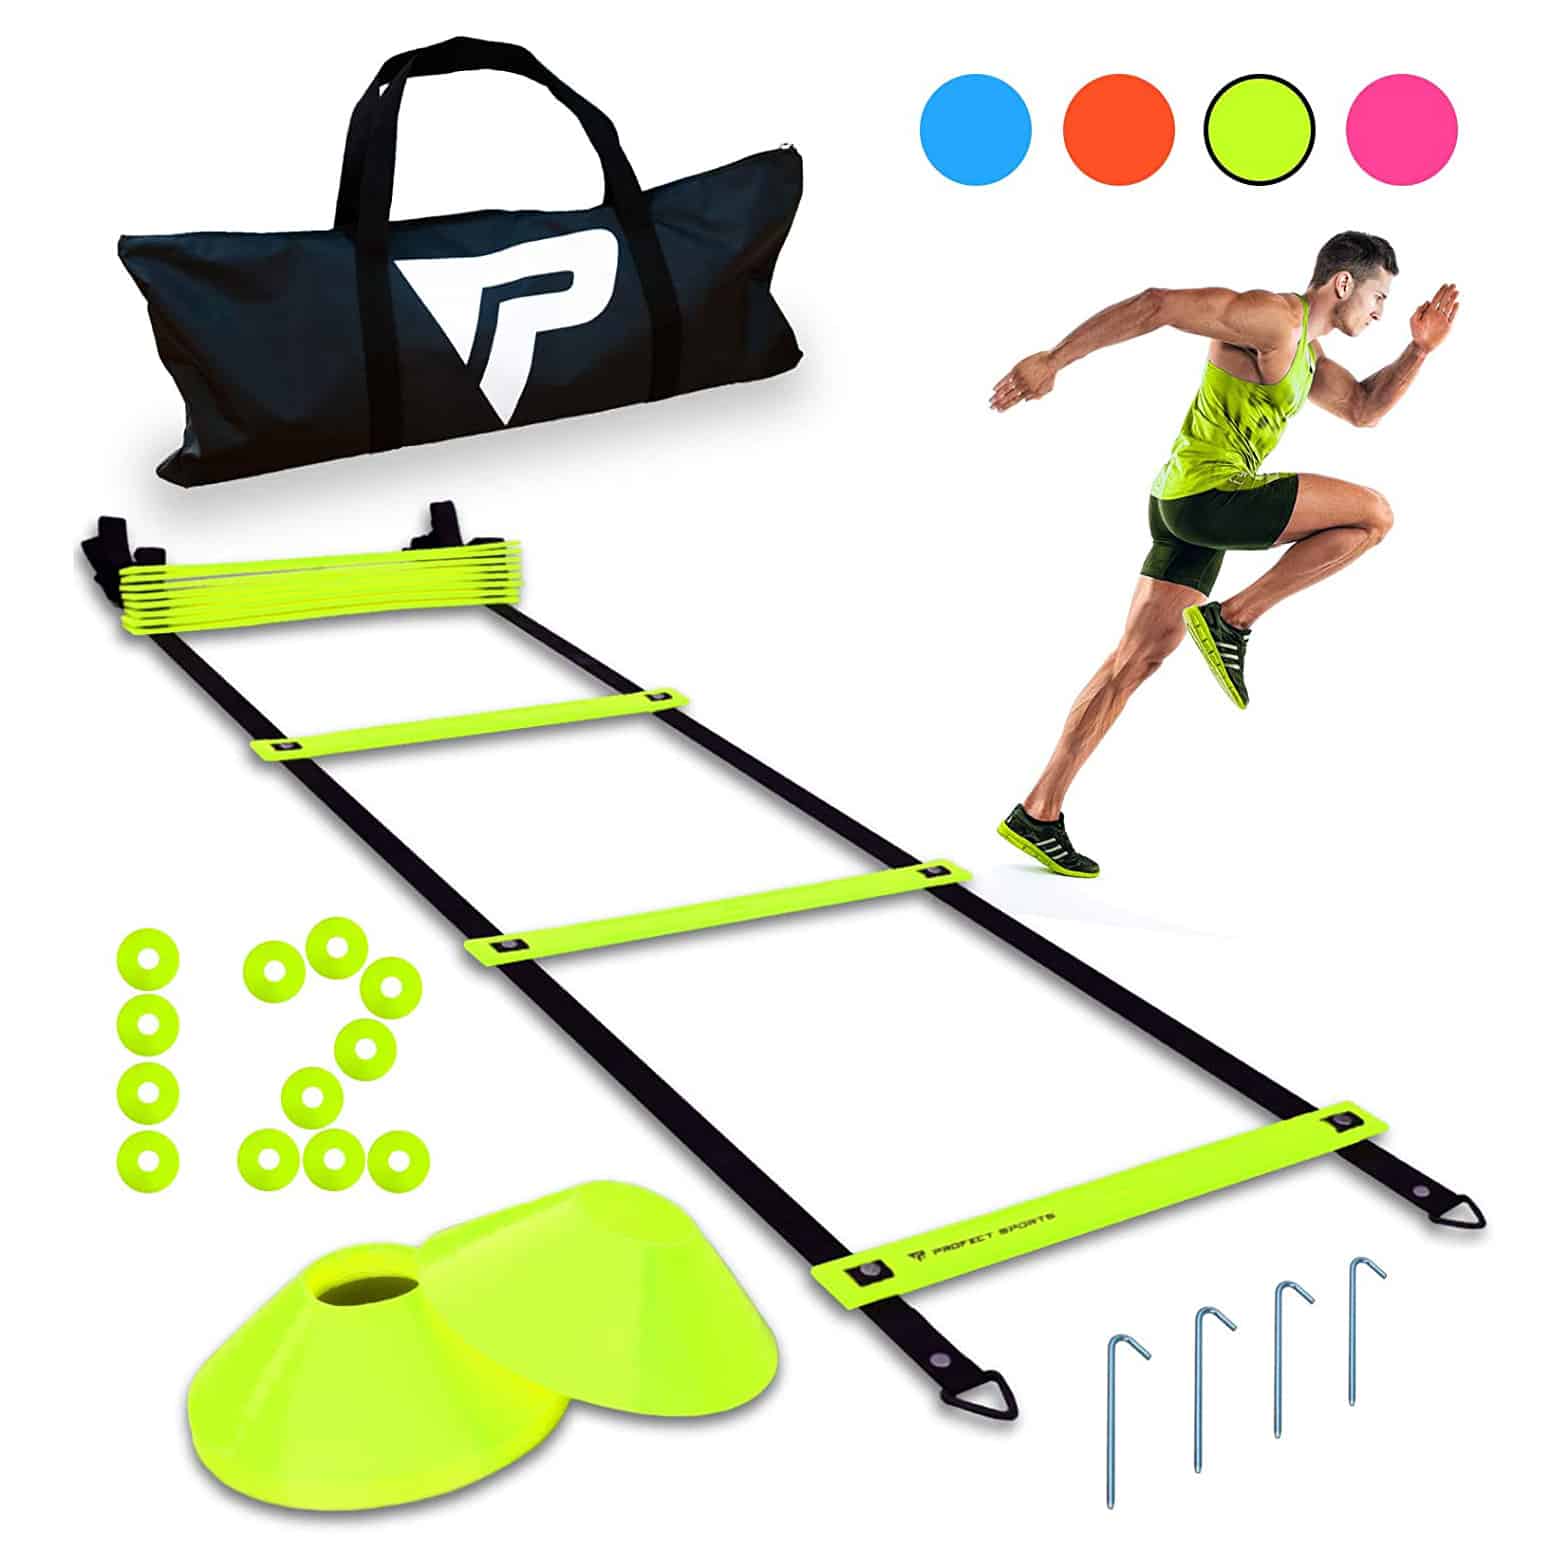 Top 10 Best Agility Ladders in 2021 Reviews - Guide Me